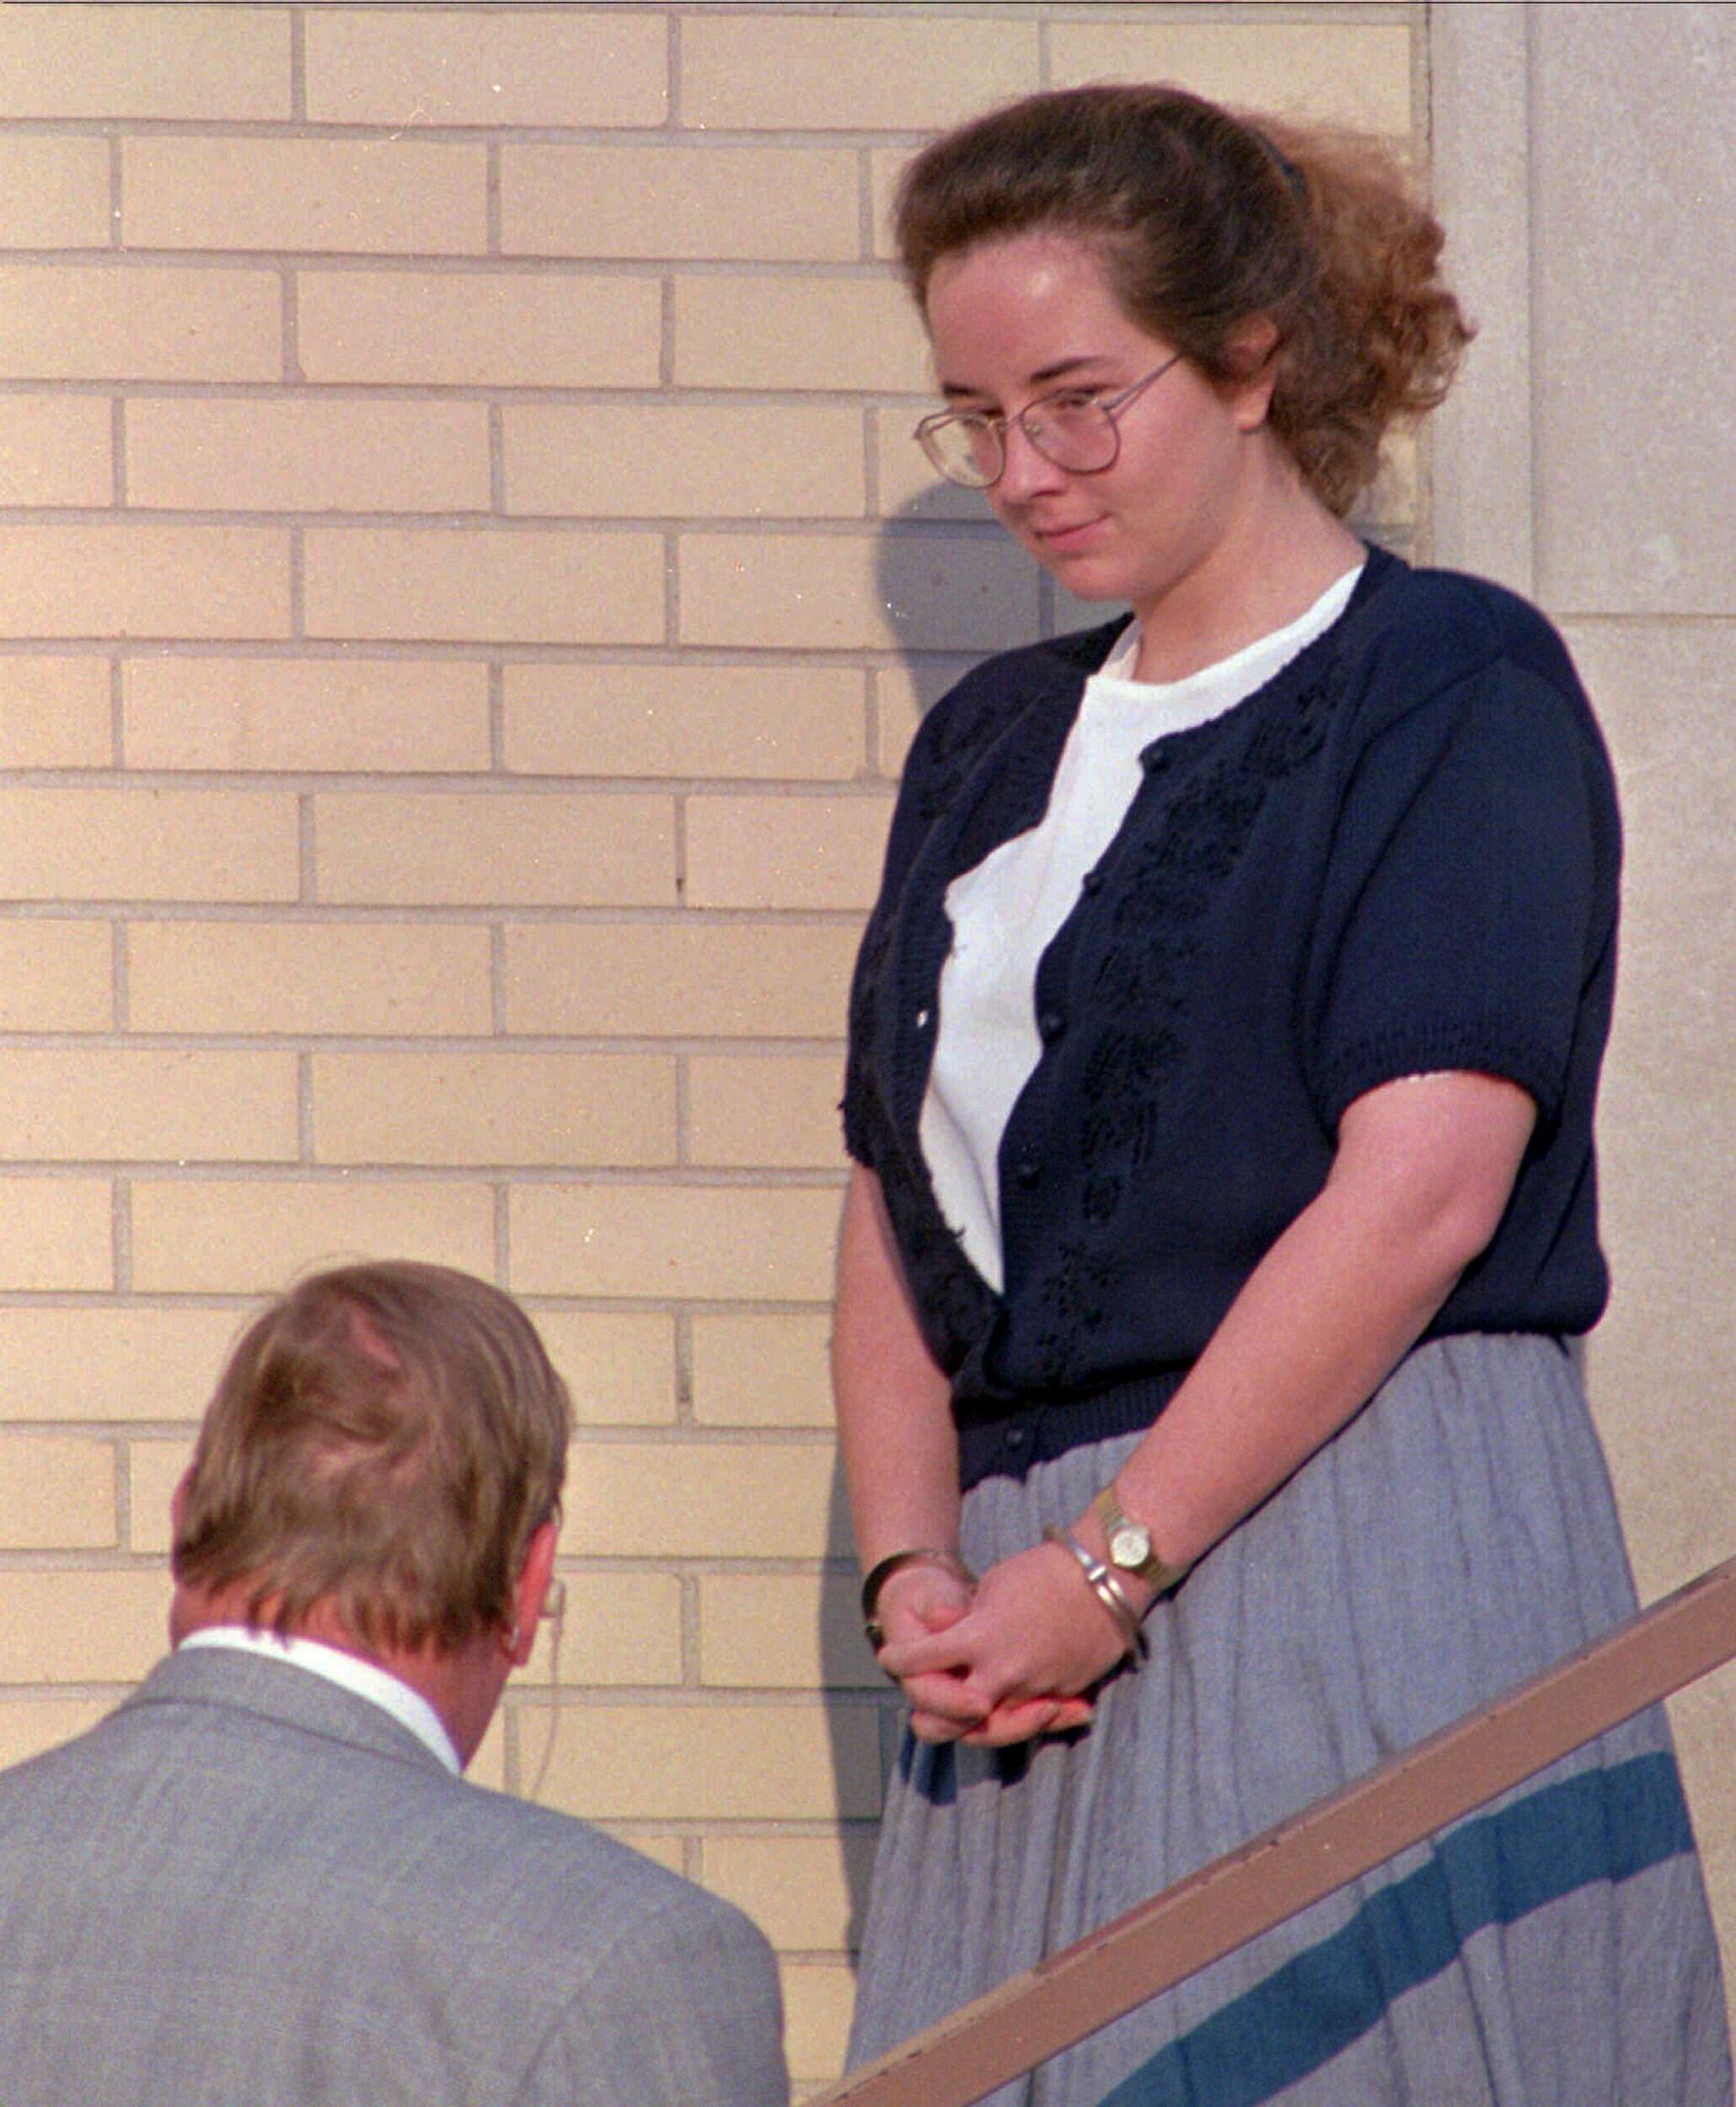 Where Is Susan Smith Now, And Is She Still Jailed, In 2022?